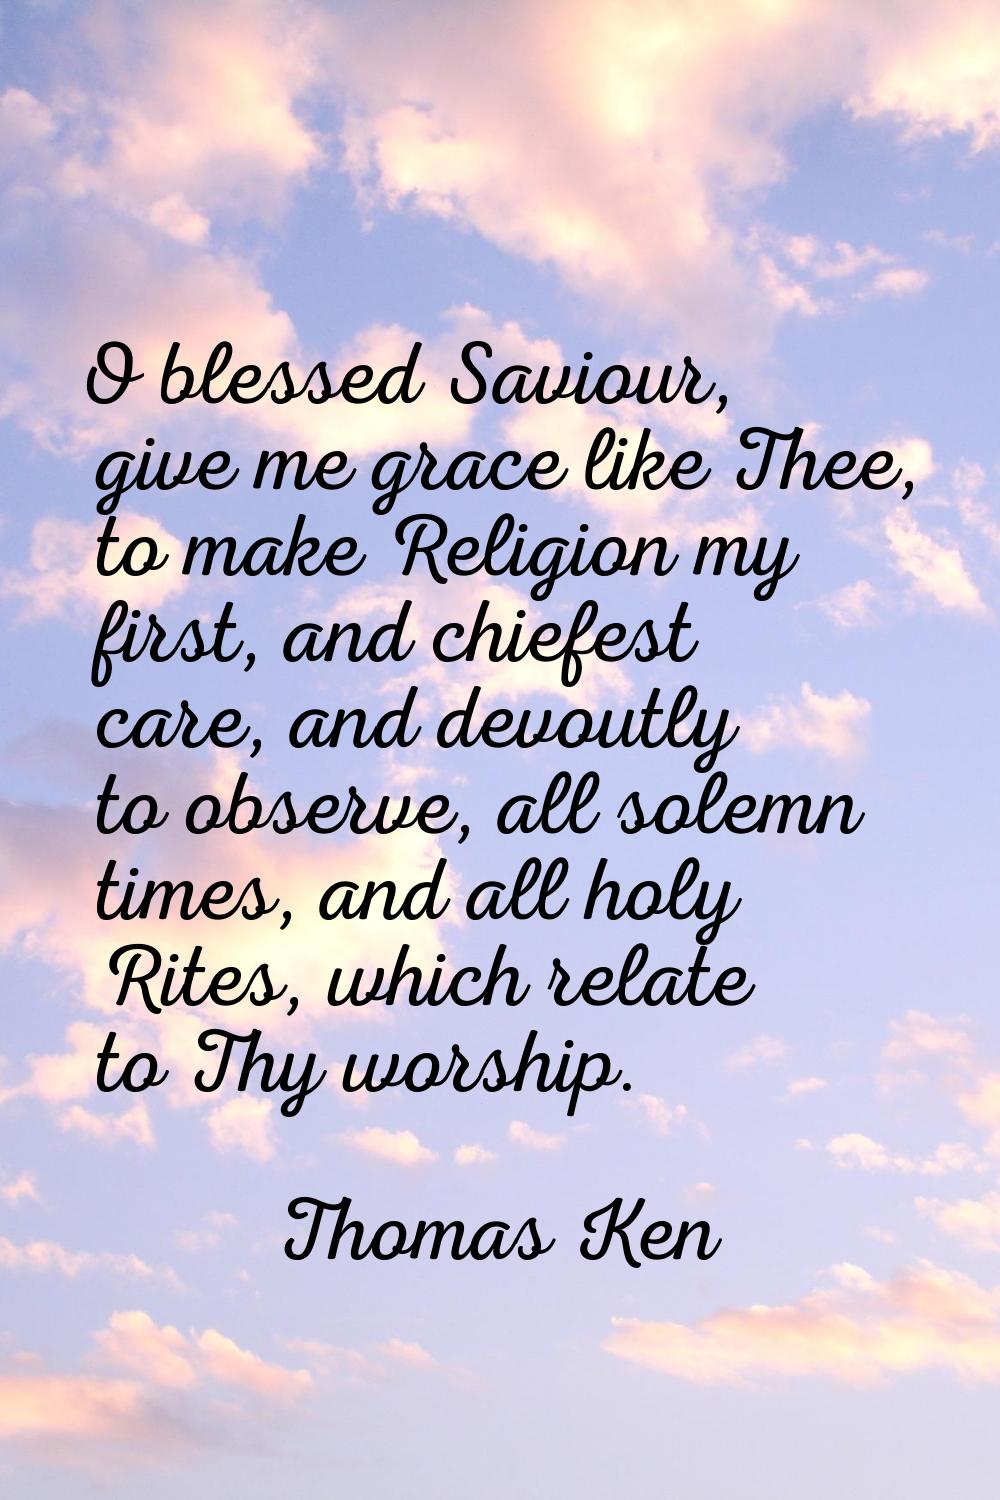 O blessed Saviour, give me grace like Thee, to make Religion my first, and chiefest care, and devou